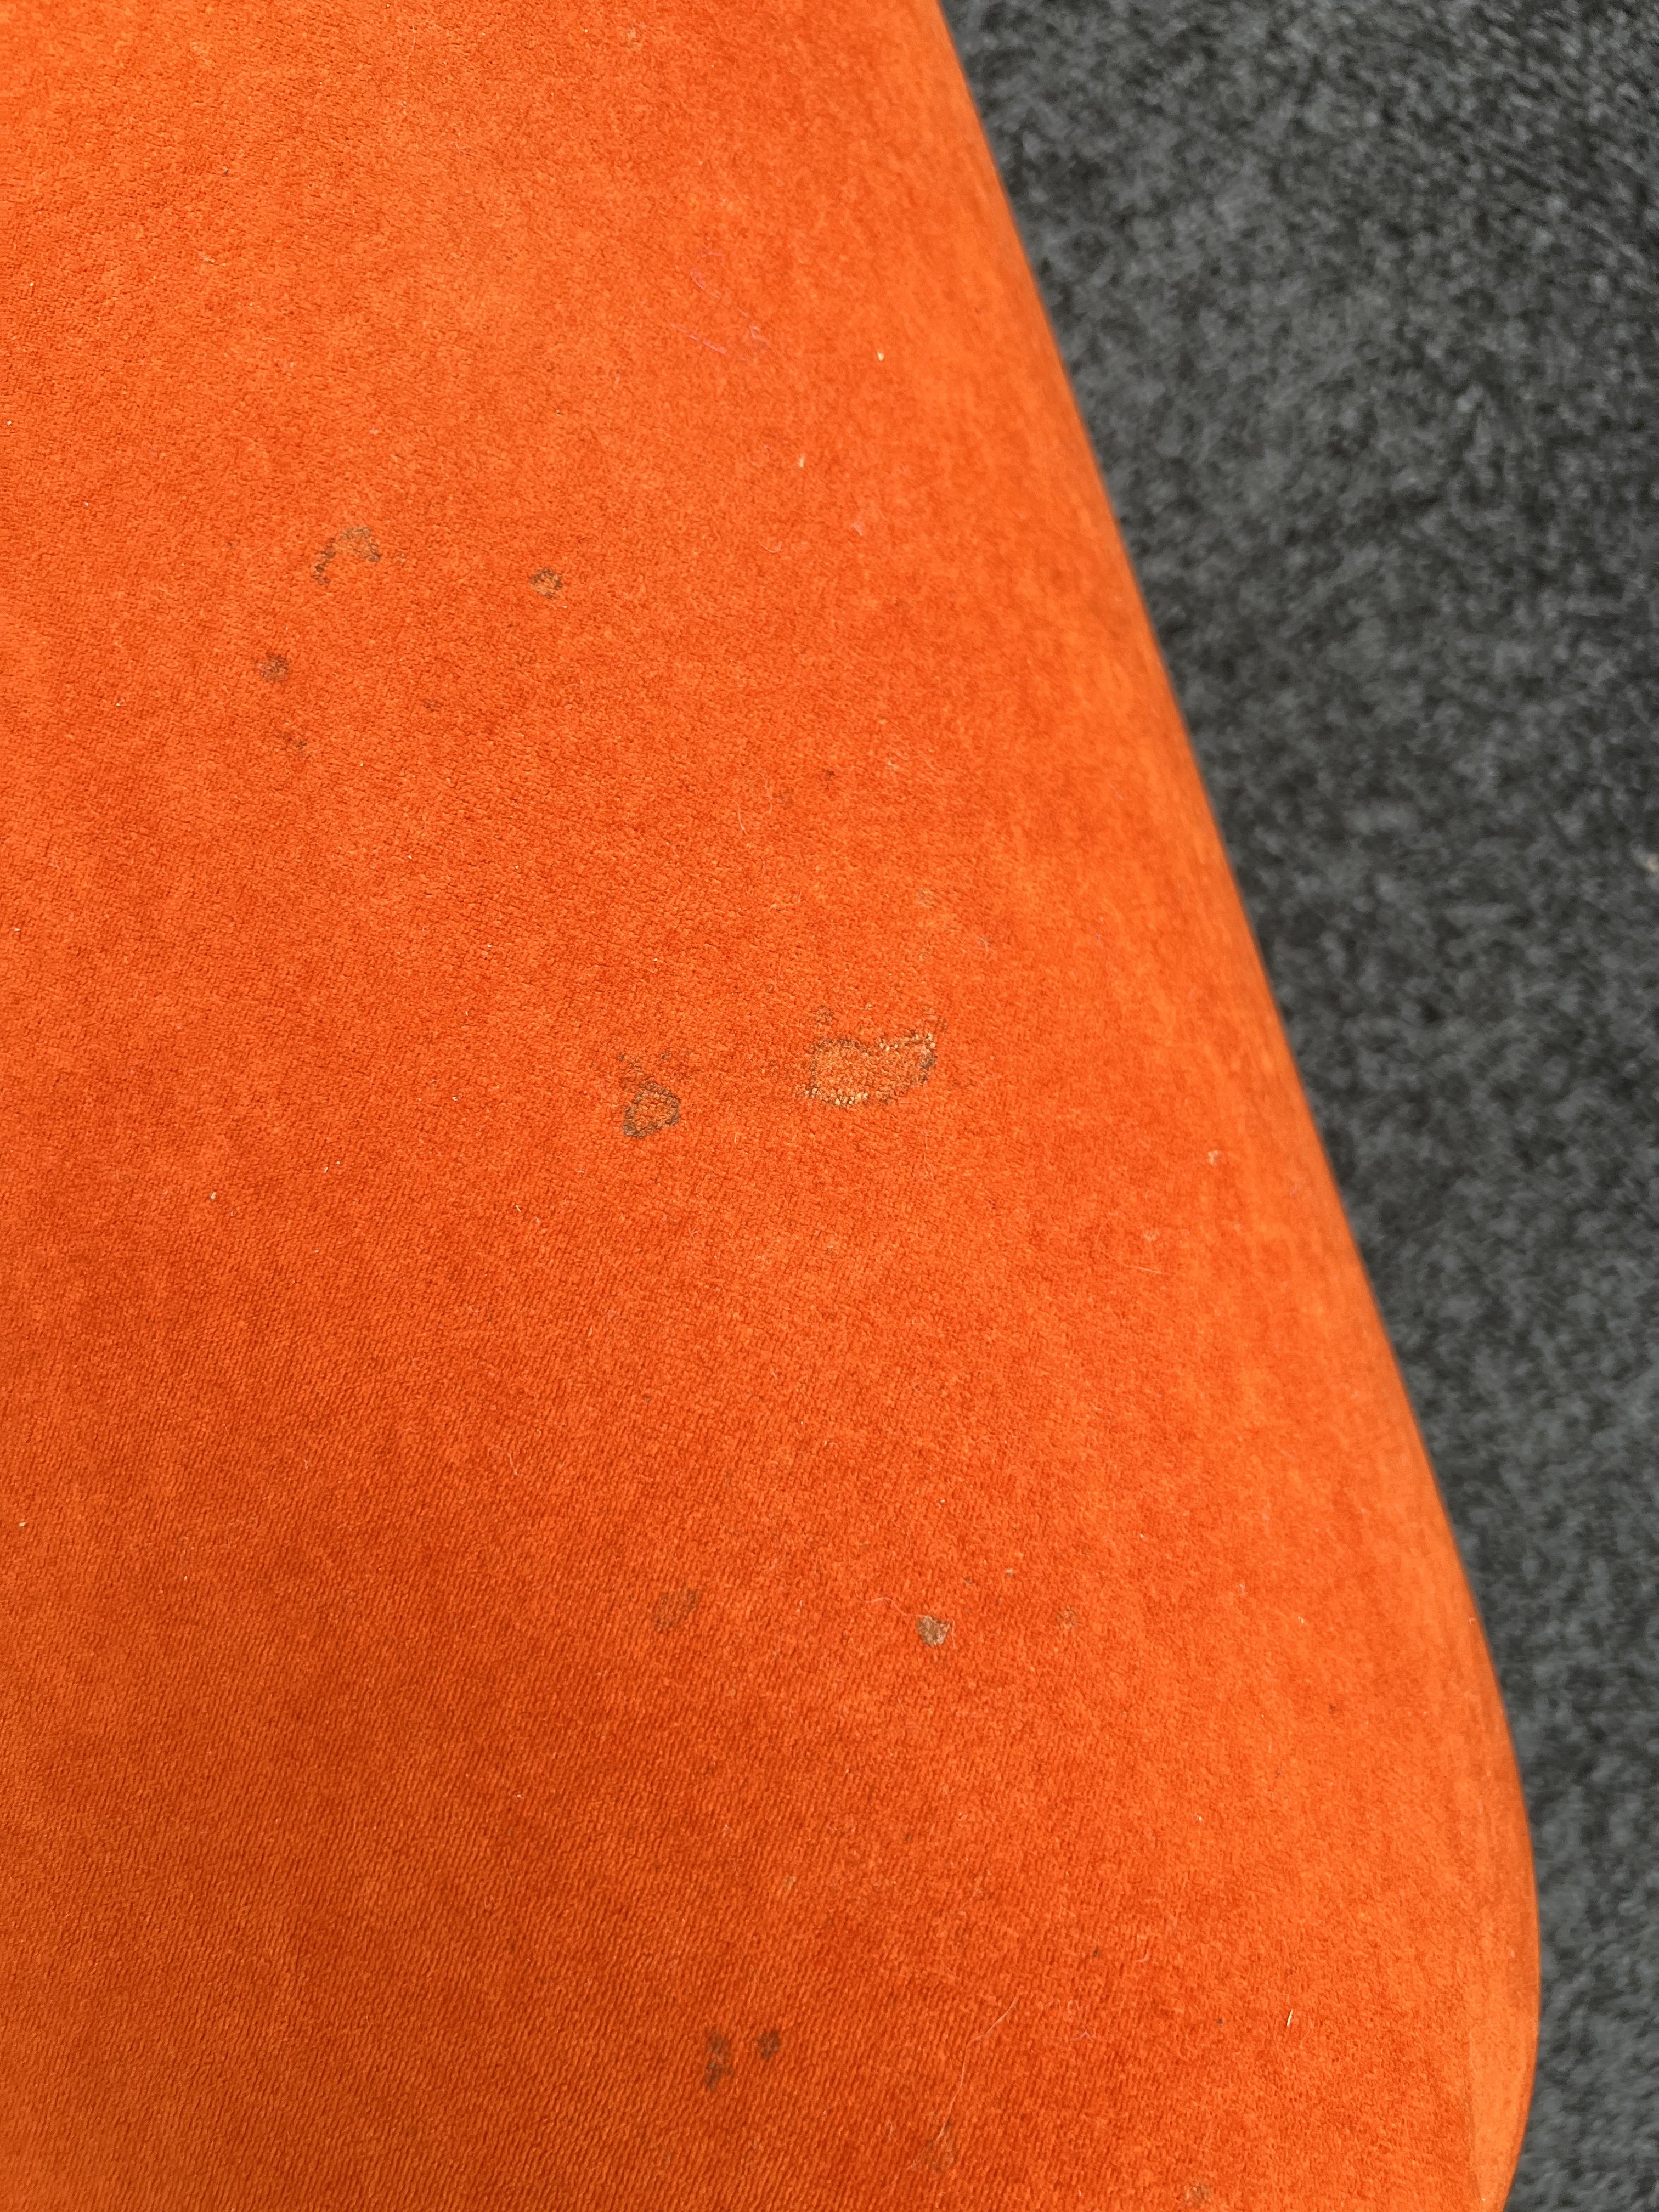 PROBABLY OLIVIER MOURGUE; AN ORANGE UPHOLSTERED SOFA AND CHAIRS (5) - Image 6 of 11